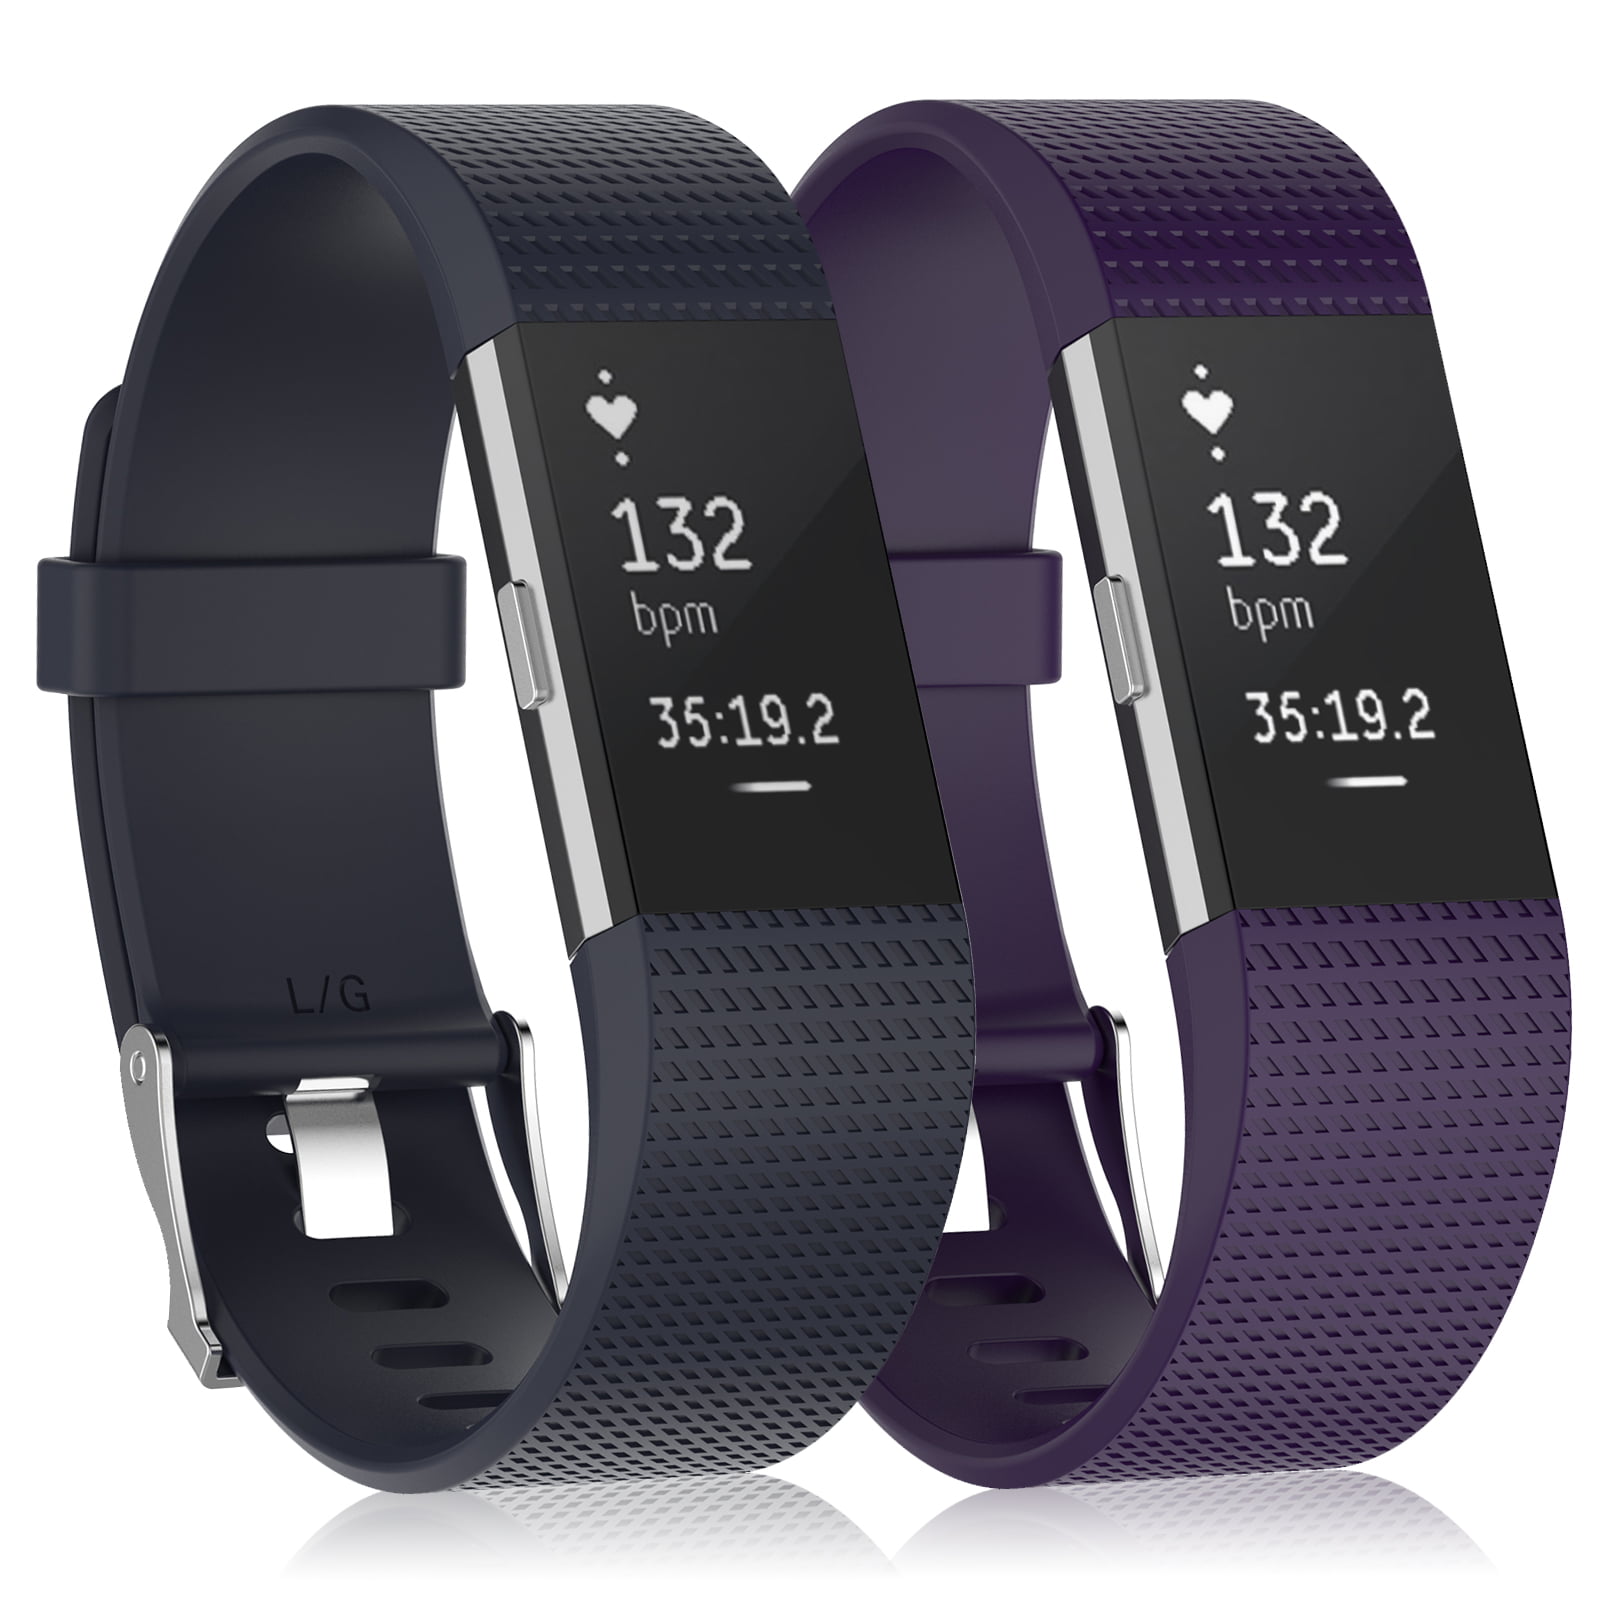 TSV Band Fit for Fitbit Charge 2, Adjustable Replacement